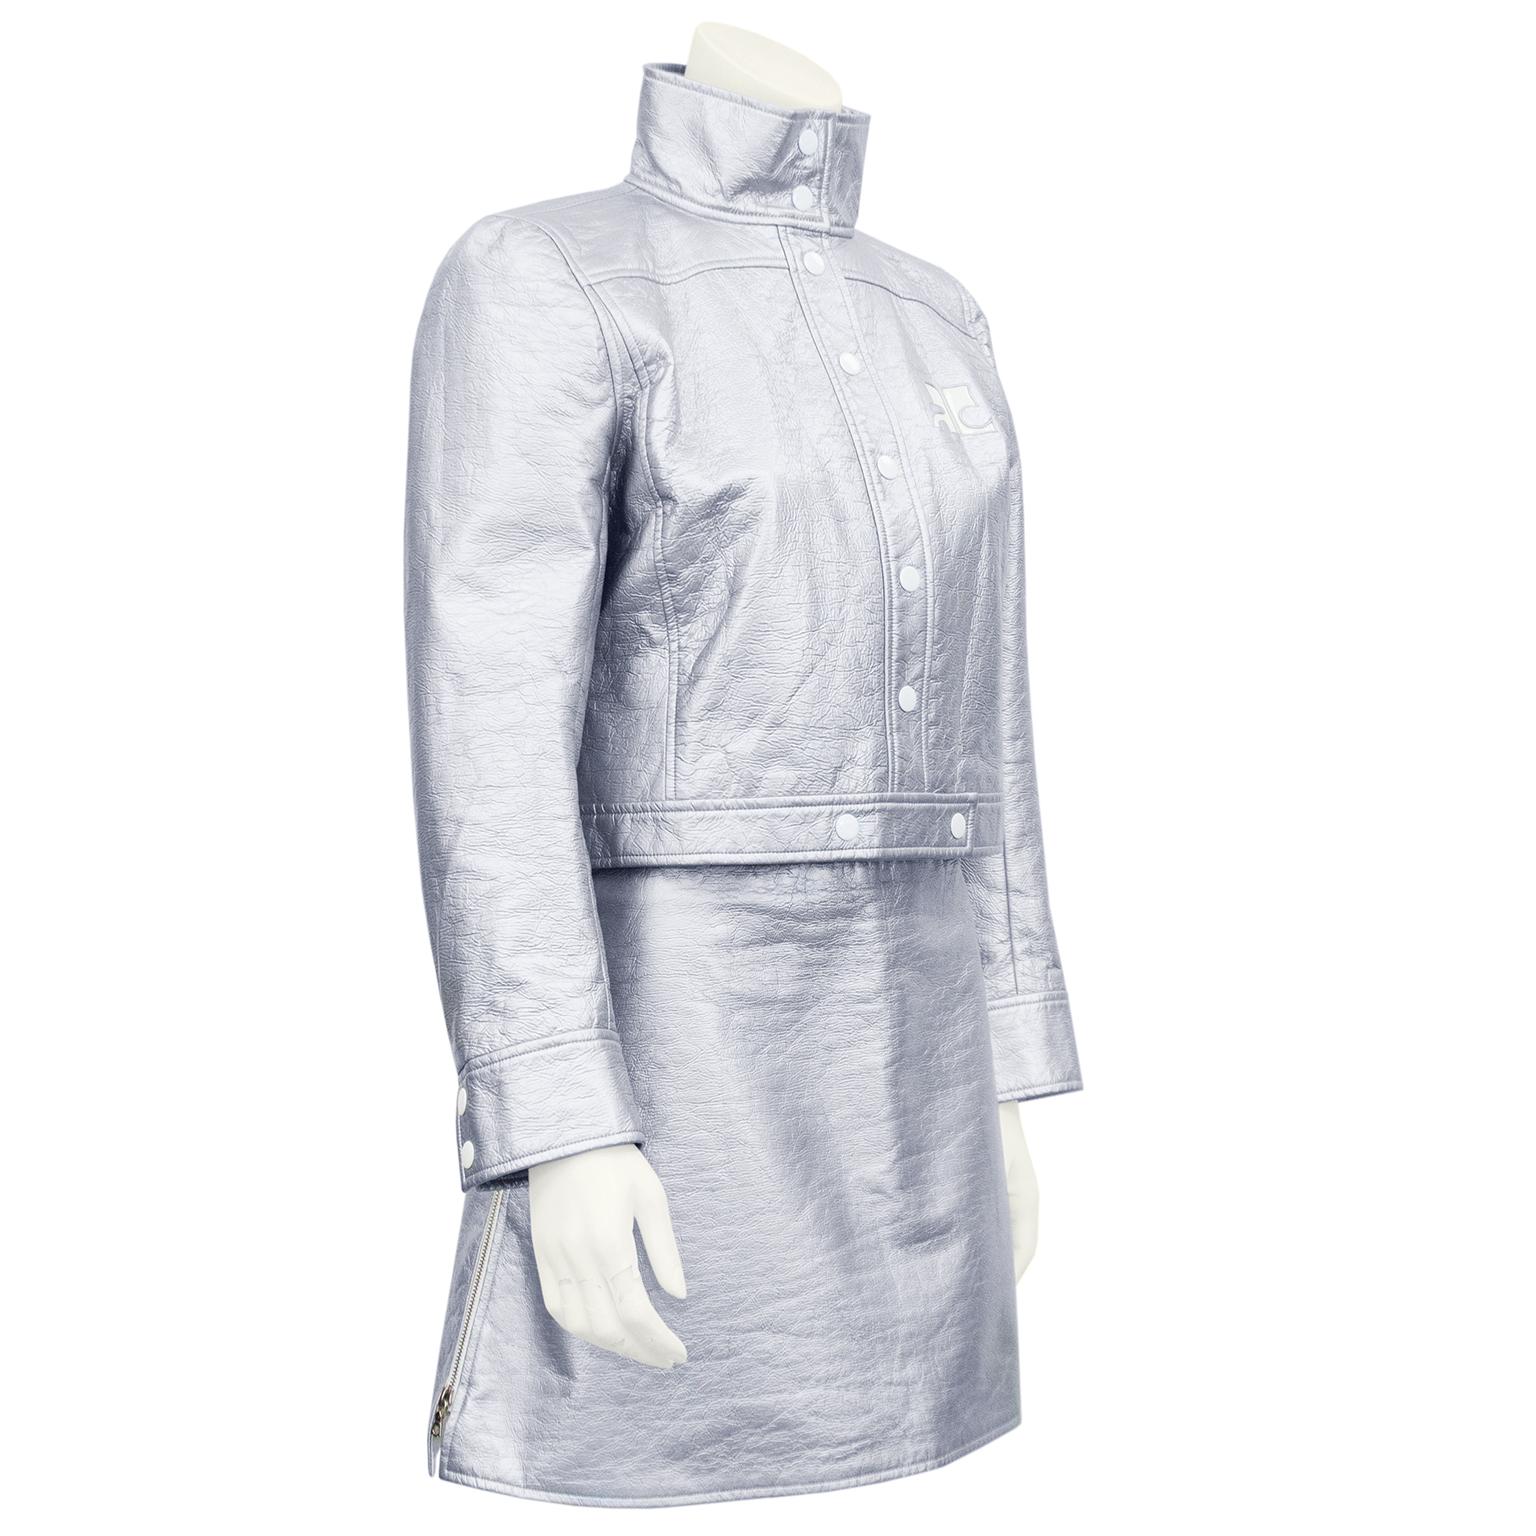 The ultimate Courreges 80’s revival look. Iconic silver vinyl Courreges biker jacket and matching mini skirt. Jacket is cropped with standing collar, white snap closures, and white Courreges logo on left side of bust. White lining with small all